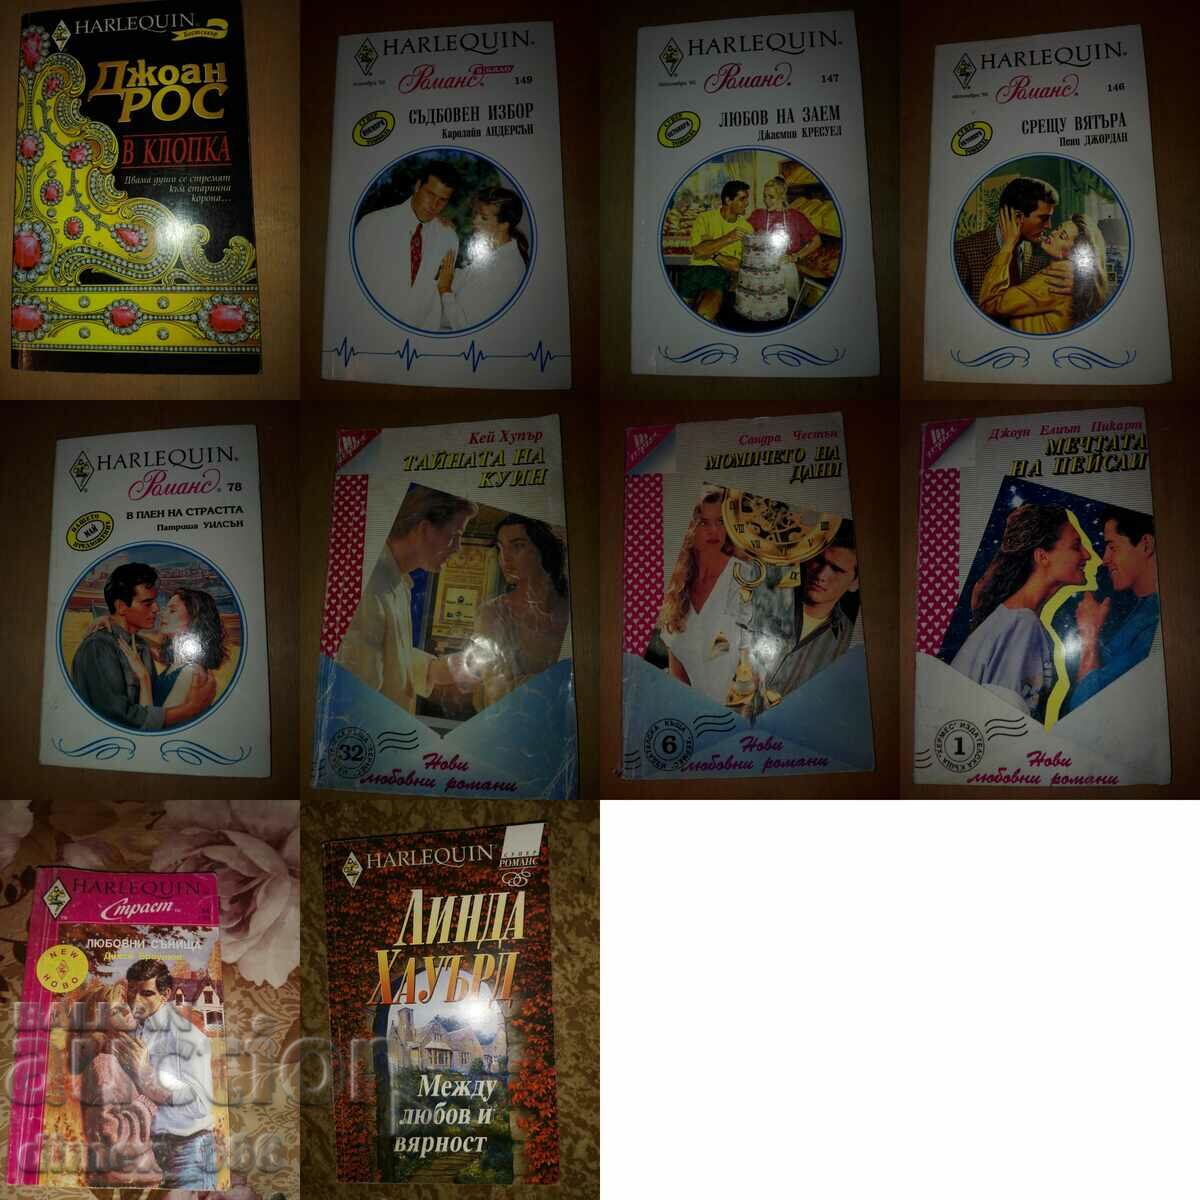 Lot of 10 books from Harlequin Publishing